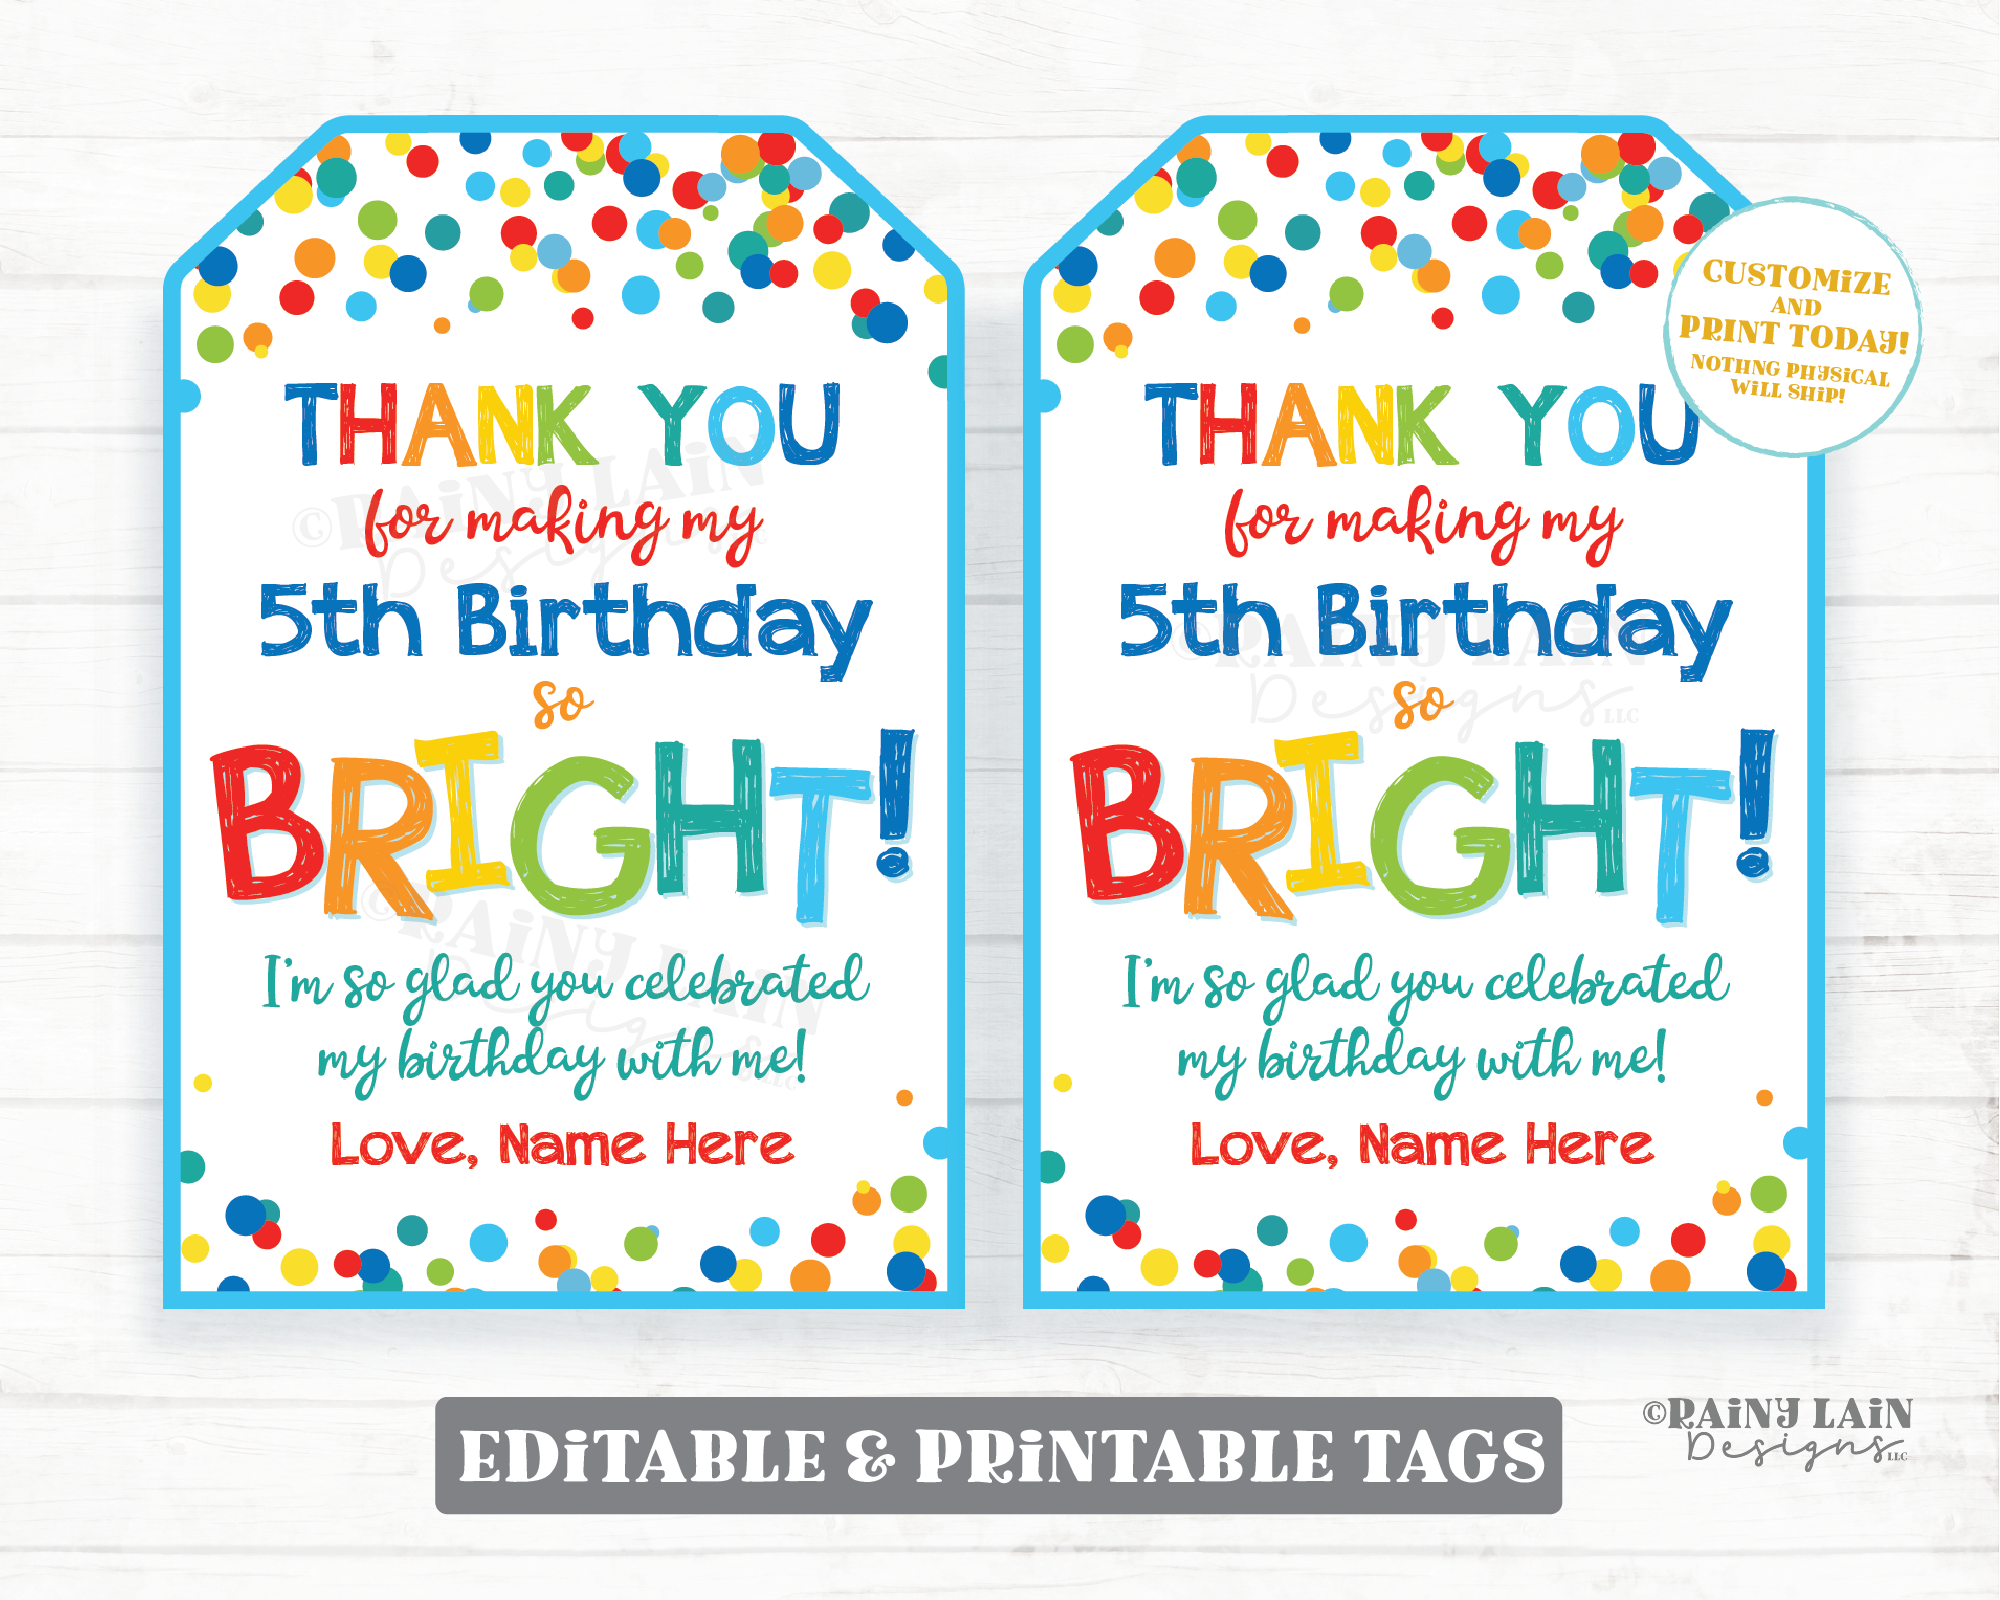 Thanks for Making My Birthday Bright Tag Finger Light Sunglasses Glow Stick Sun Summer Bright Brighten School Party Birthday Party Favor